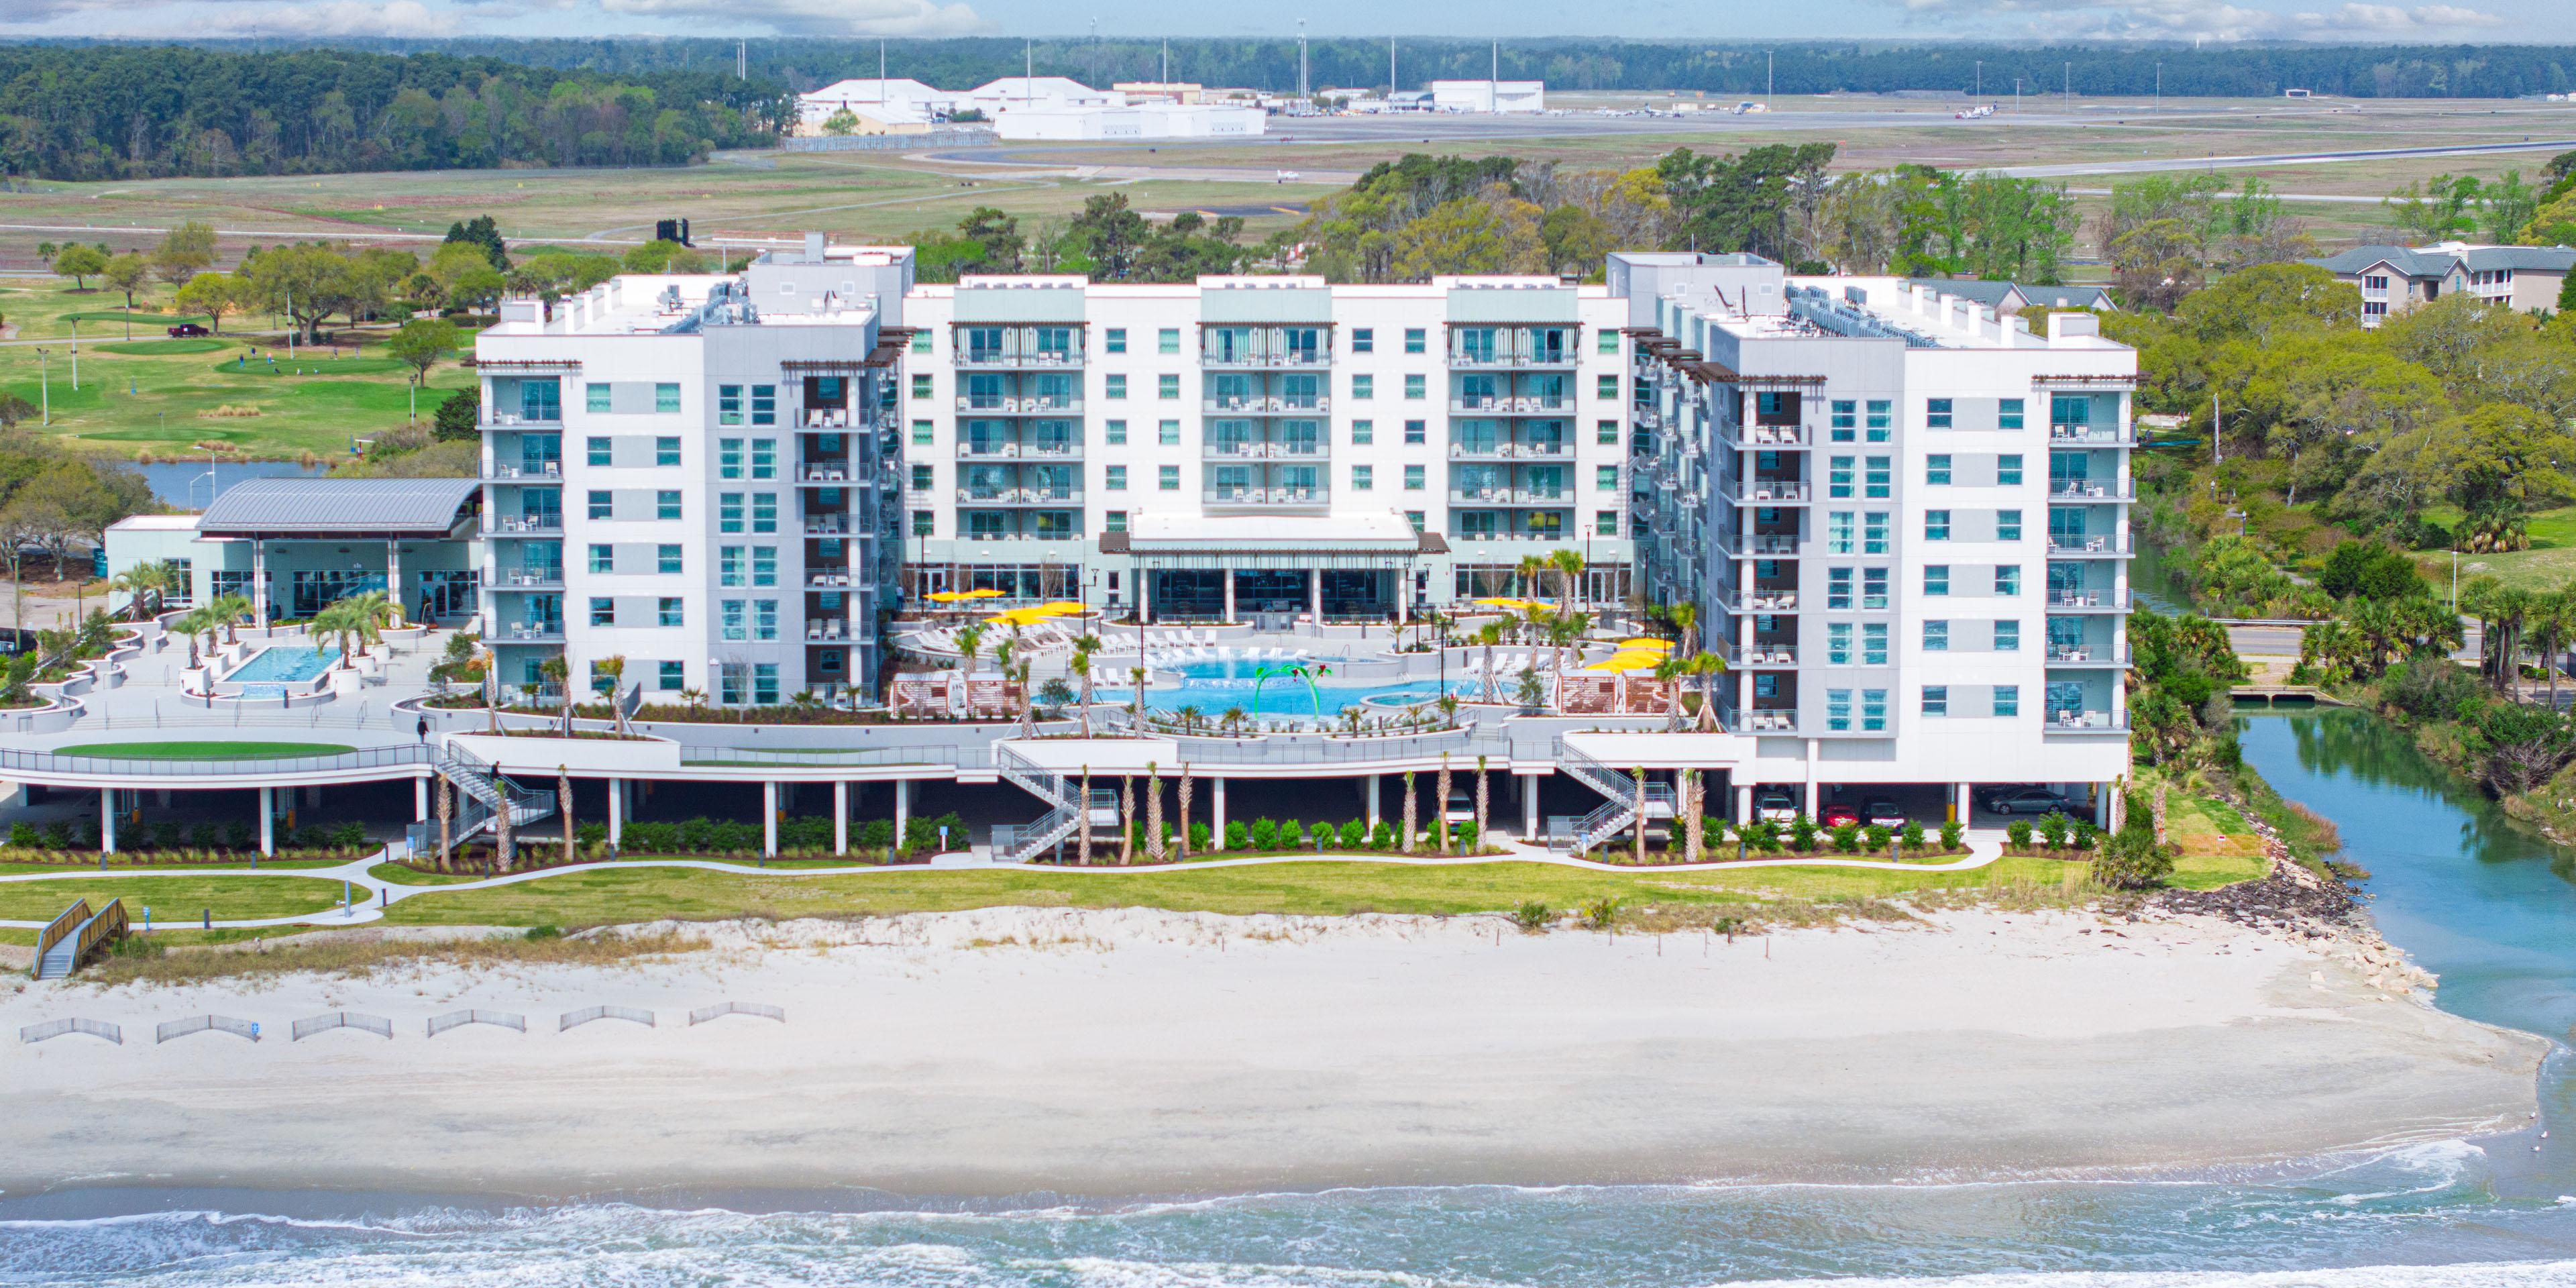 Holiday Inn Club Vacations Myrtle Beach Oceanfront